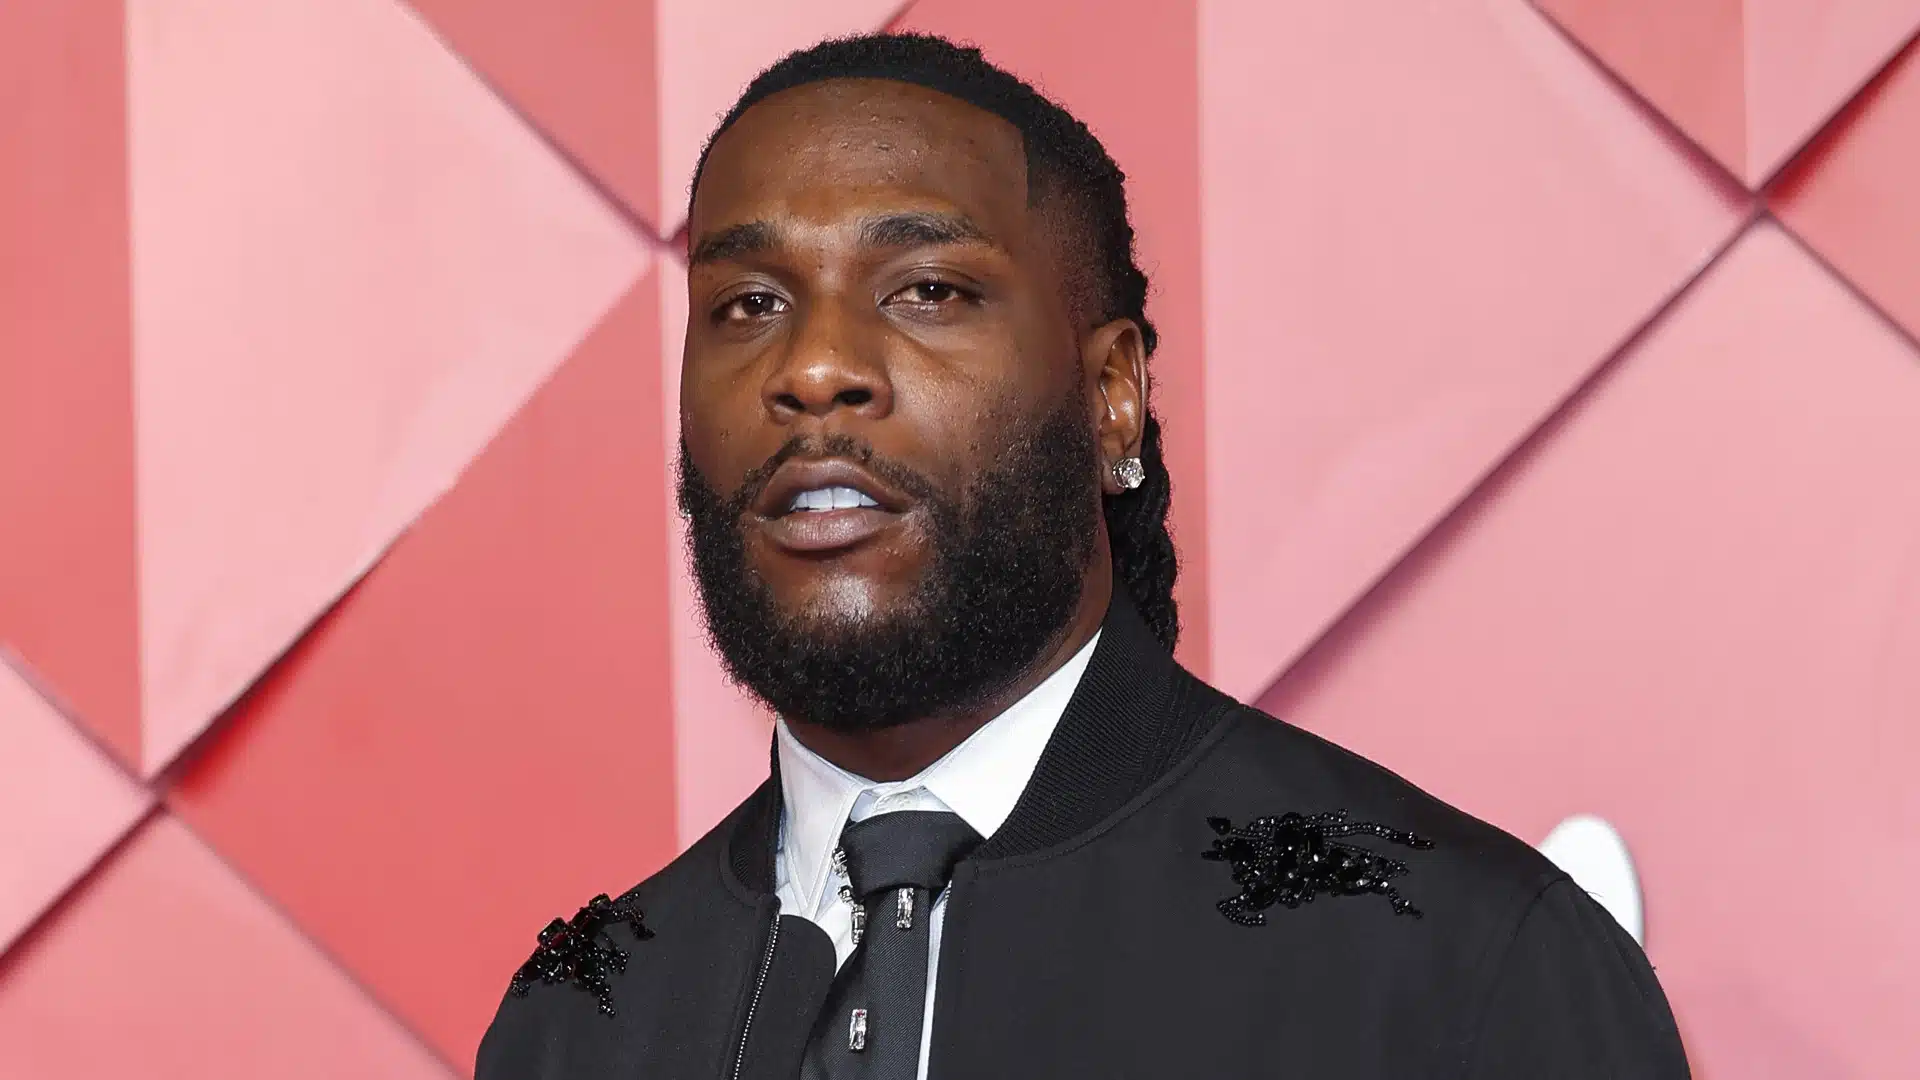 Burna Boy has done more for Nigeria than our ambassadors – Alibaba